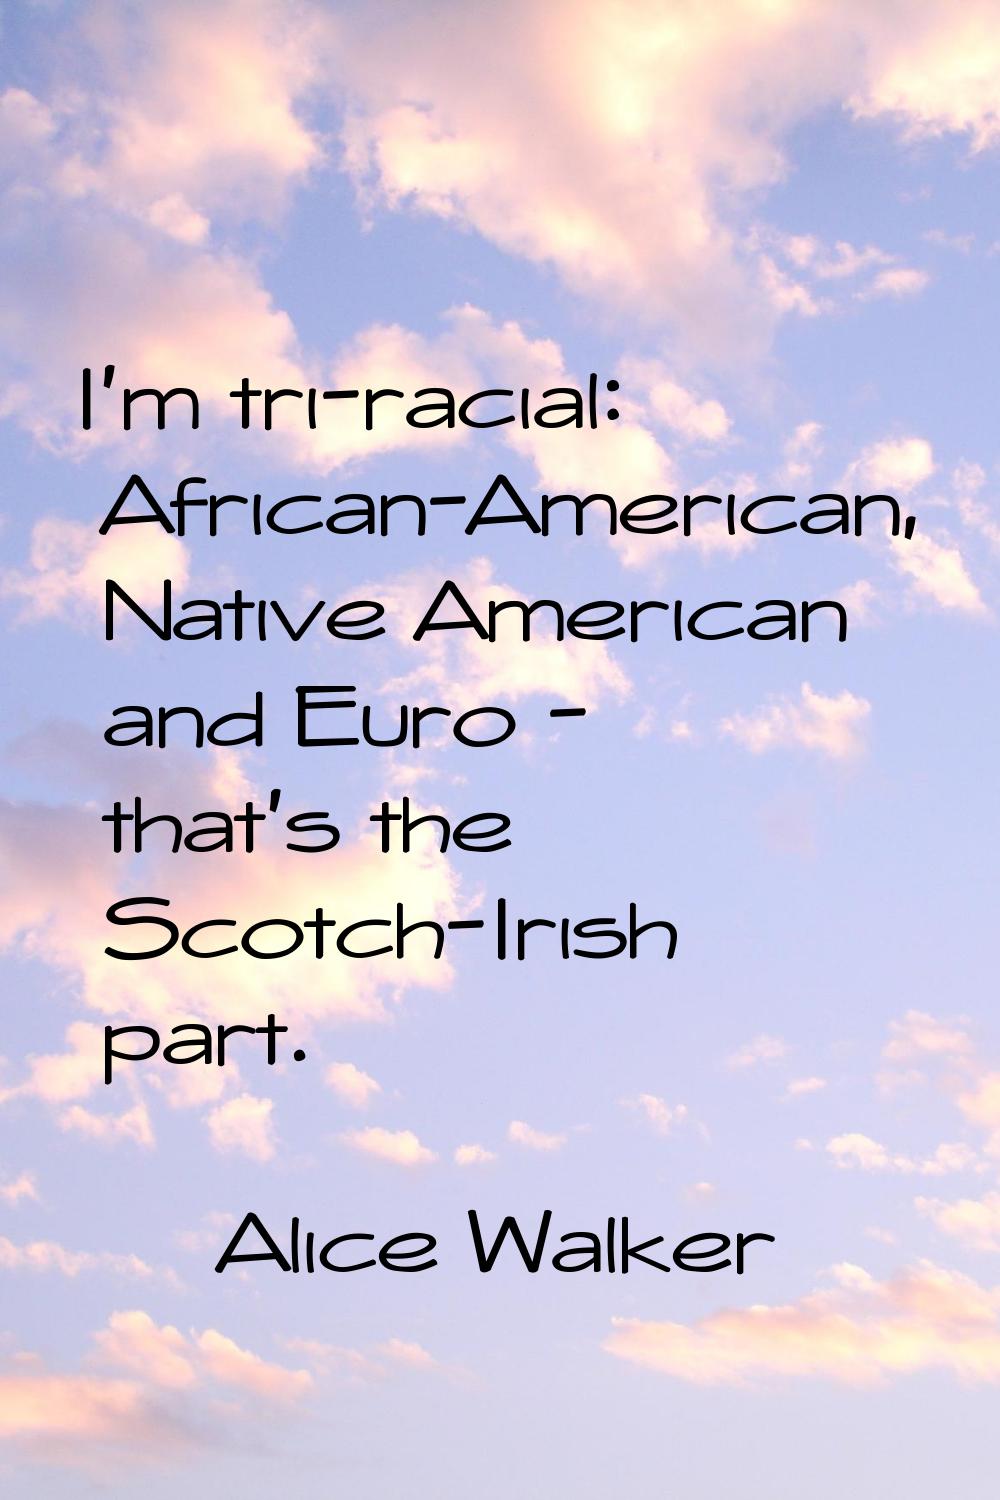 I'm tri-racial: African-American, Native American and Euro - that's the Scotch-Irish part.